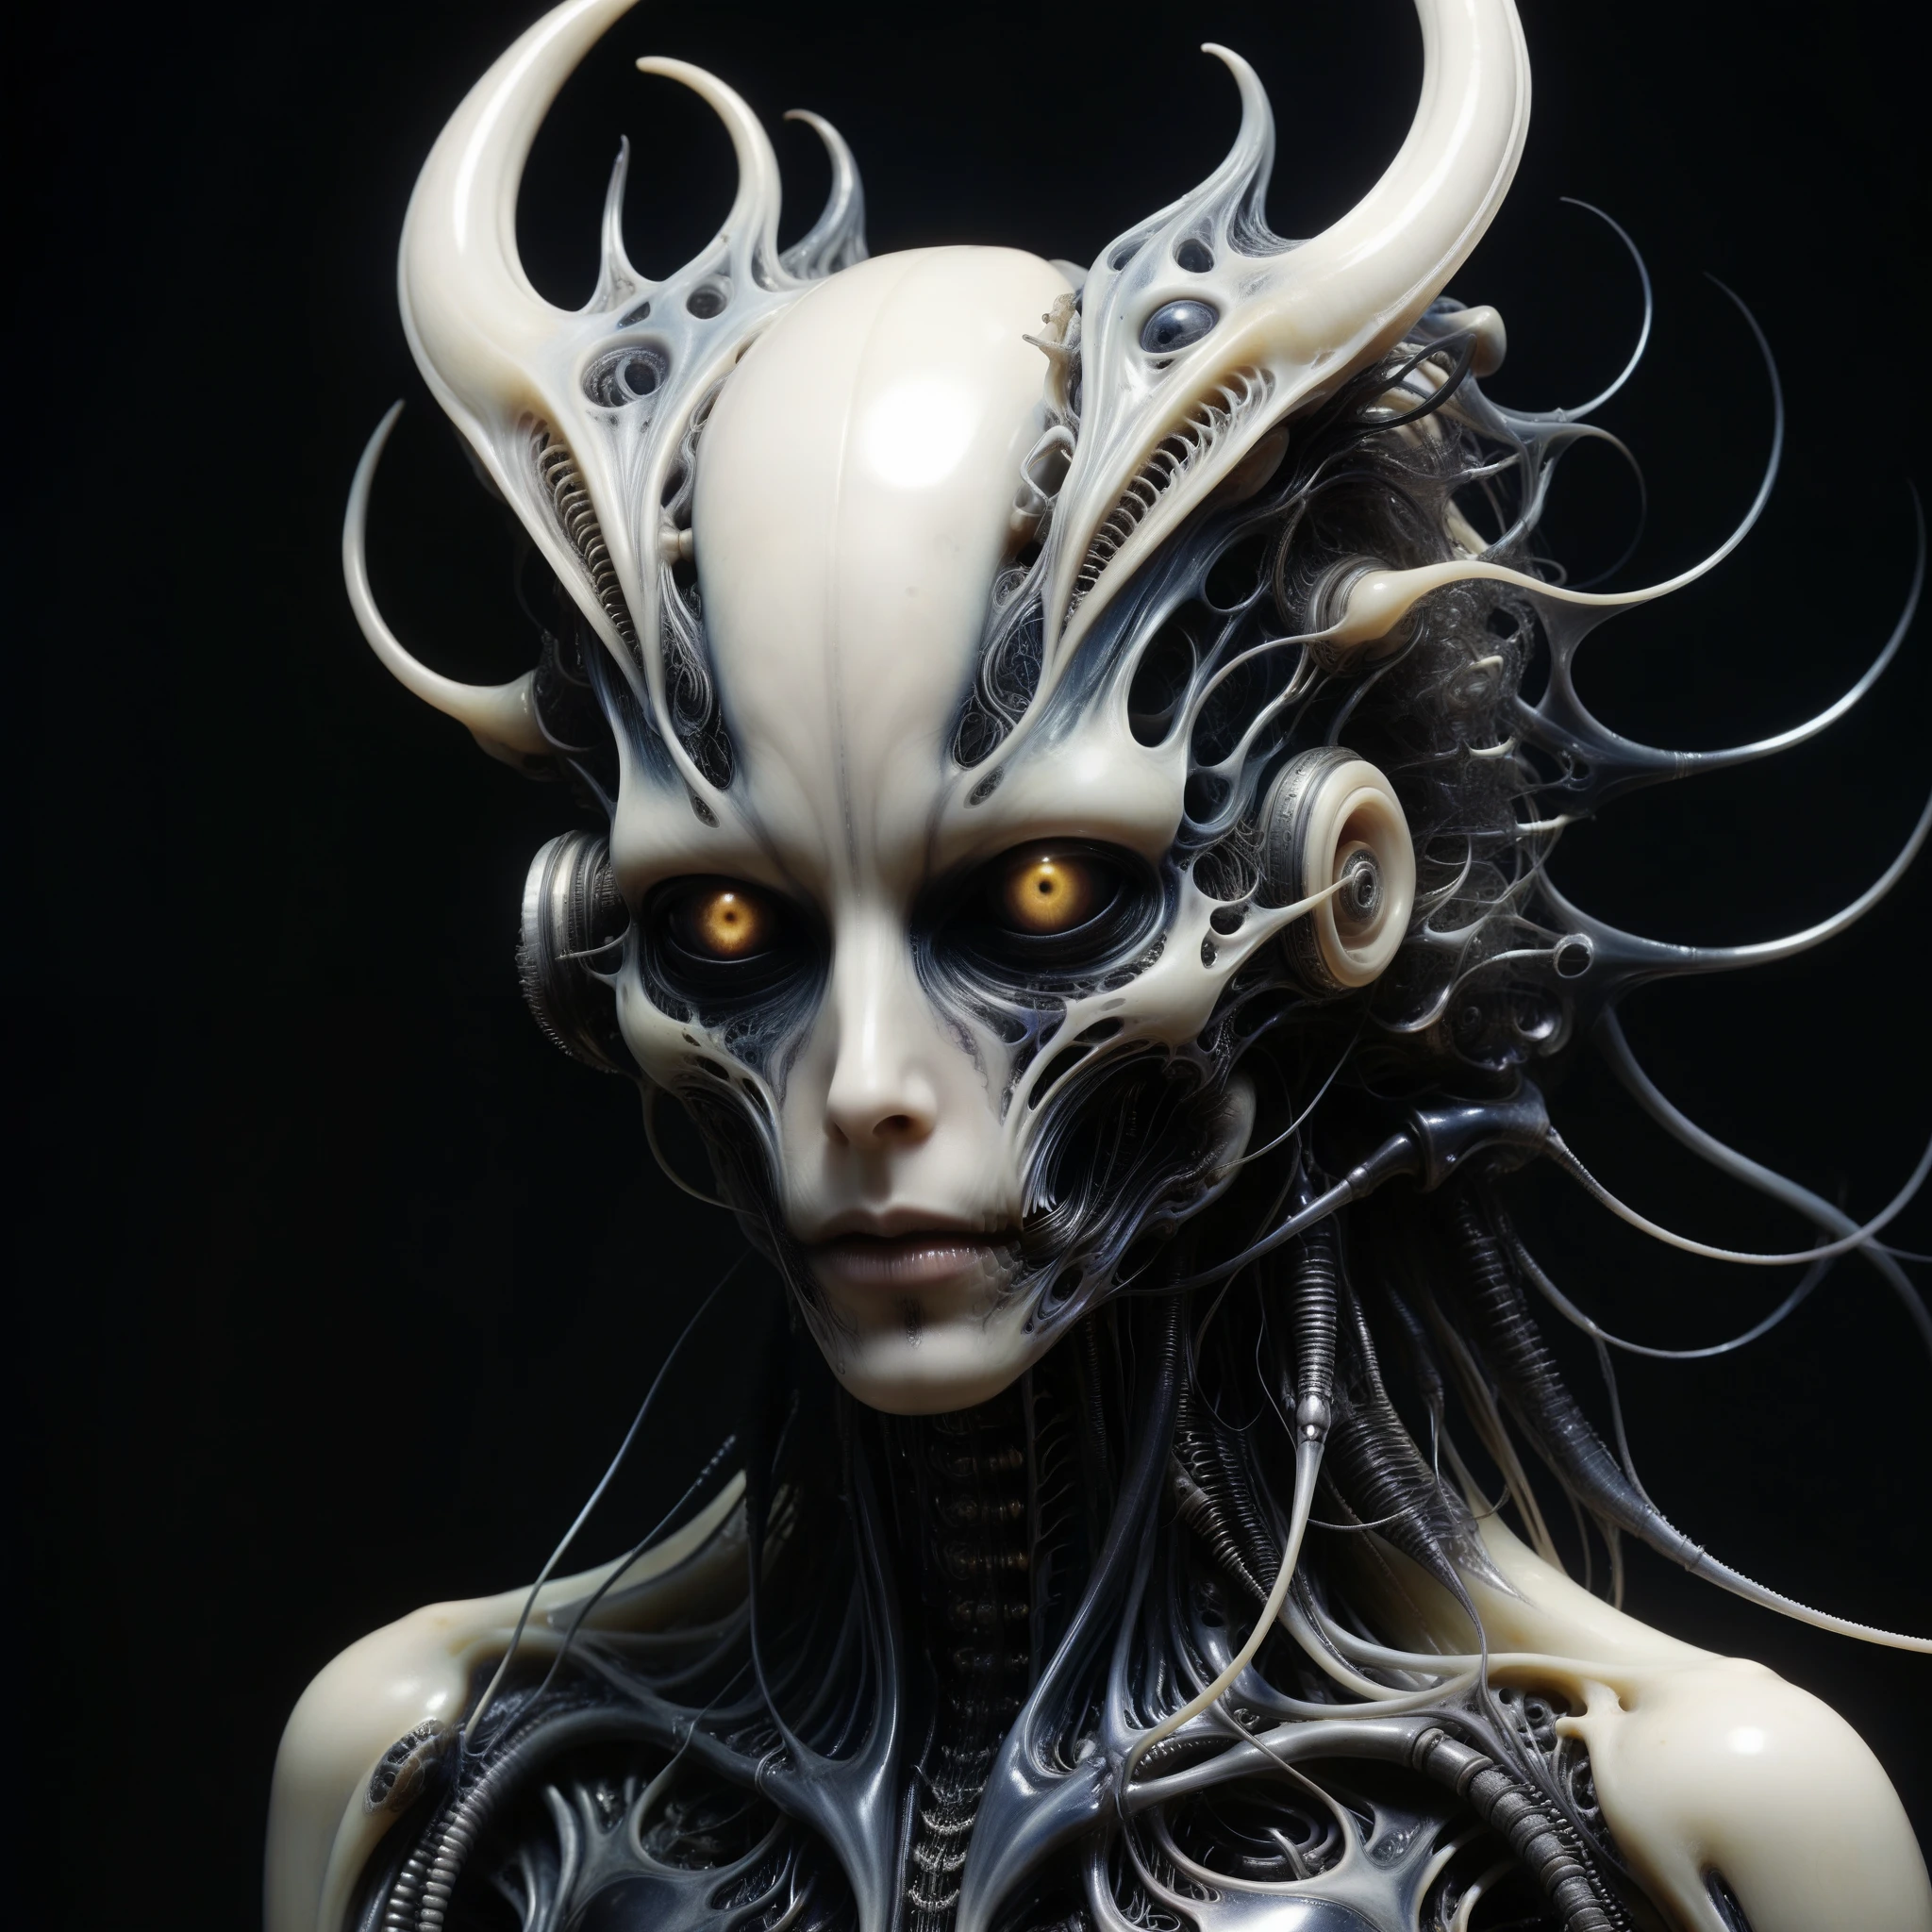 Explore a chilling symphony of AI-generated music resonating from within grotesque, organic structures inspired by H.R. Giger's nightmarish creations.